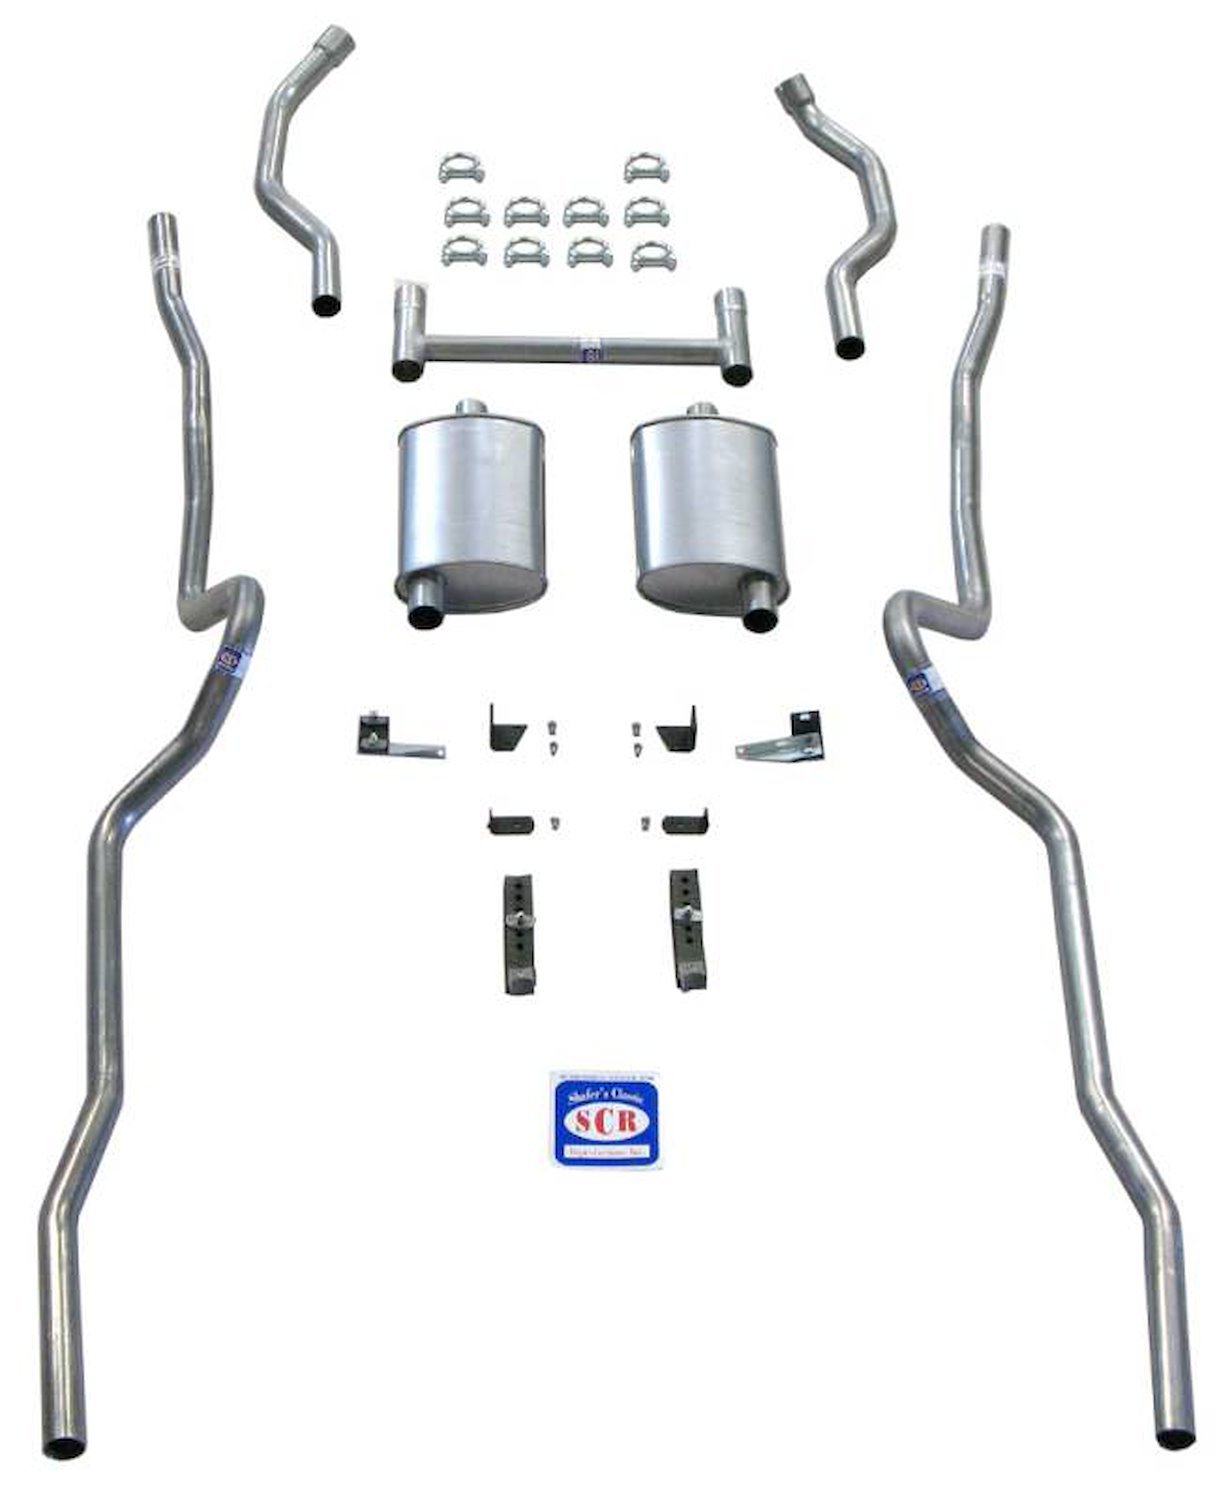 63093S 1955-1957 Chevrolet Full-Size 2 in. Dual Turbo Exhaust System, 304 Stainless Steel